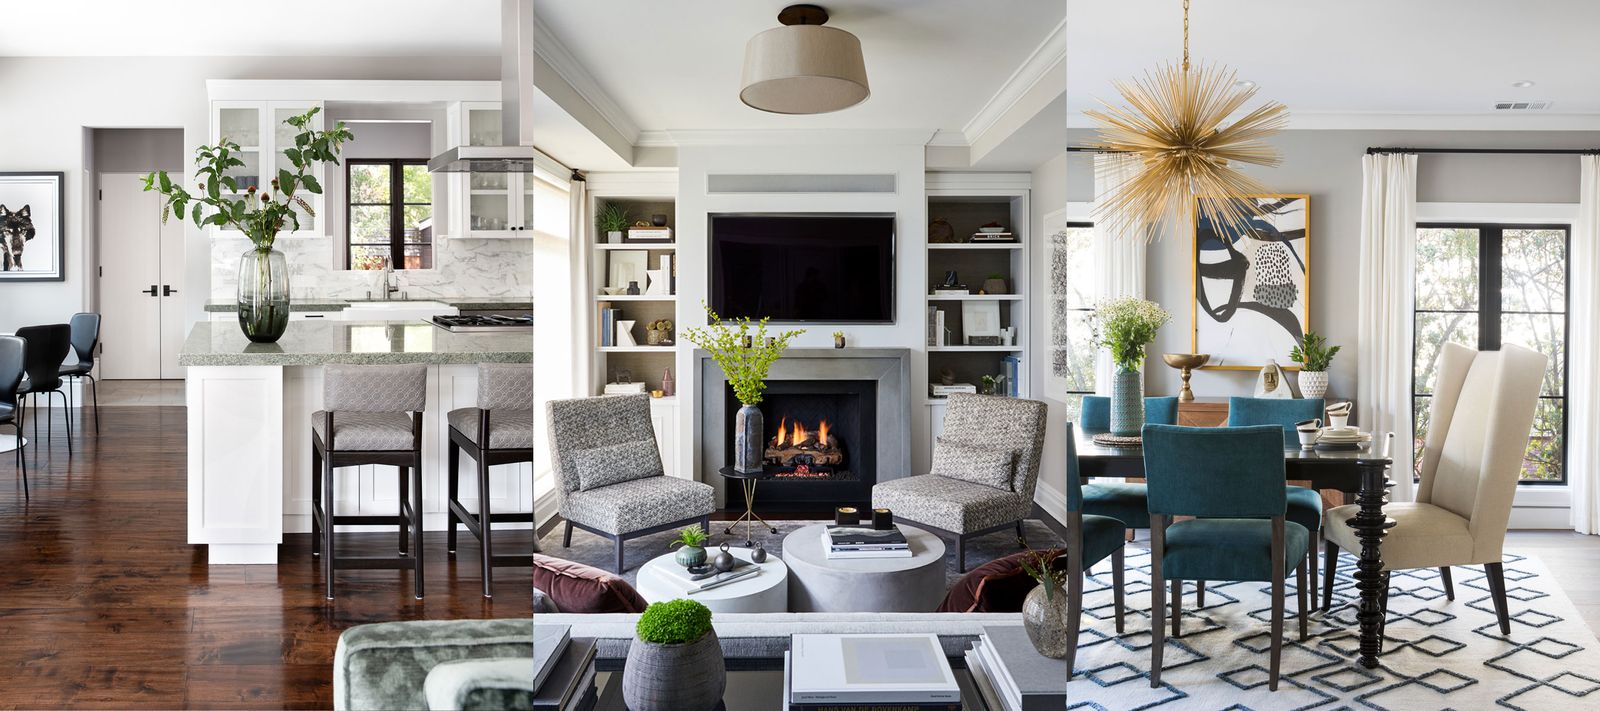 The 5 mistakes to avoid when decorating with gray